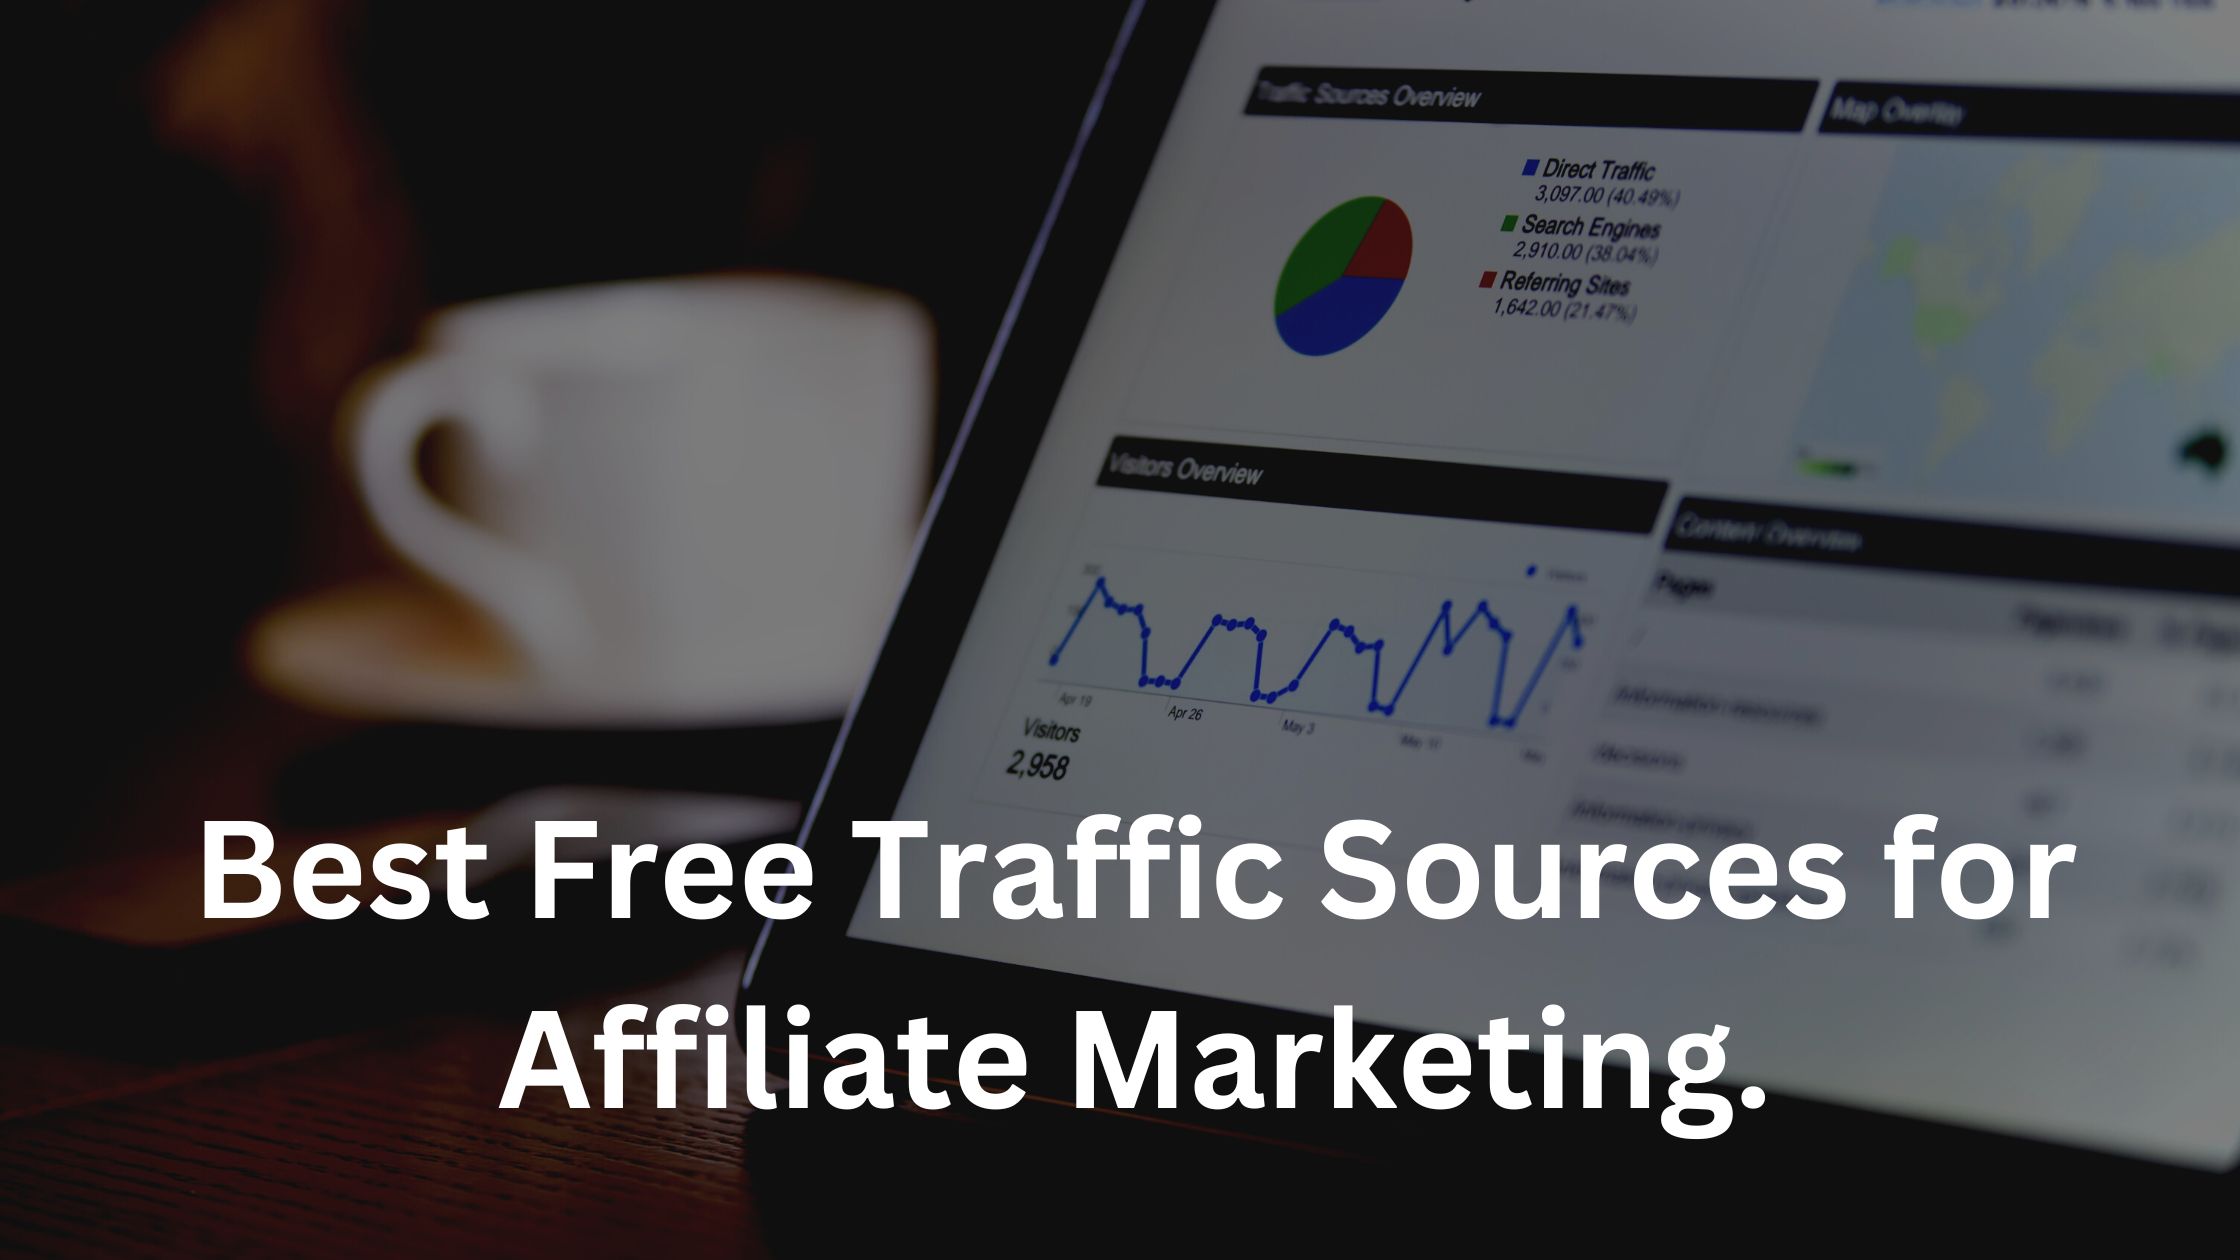 Best Free Traffic Sources for Affiliate Marketing.